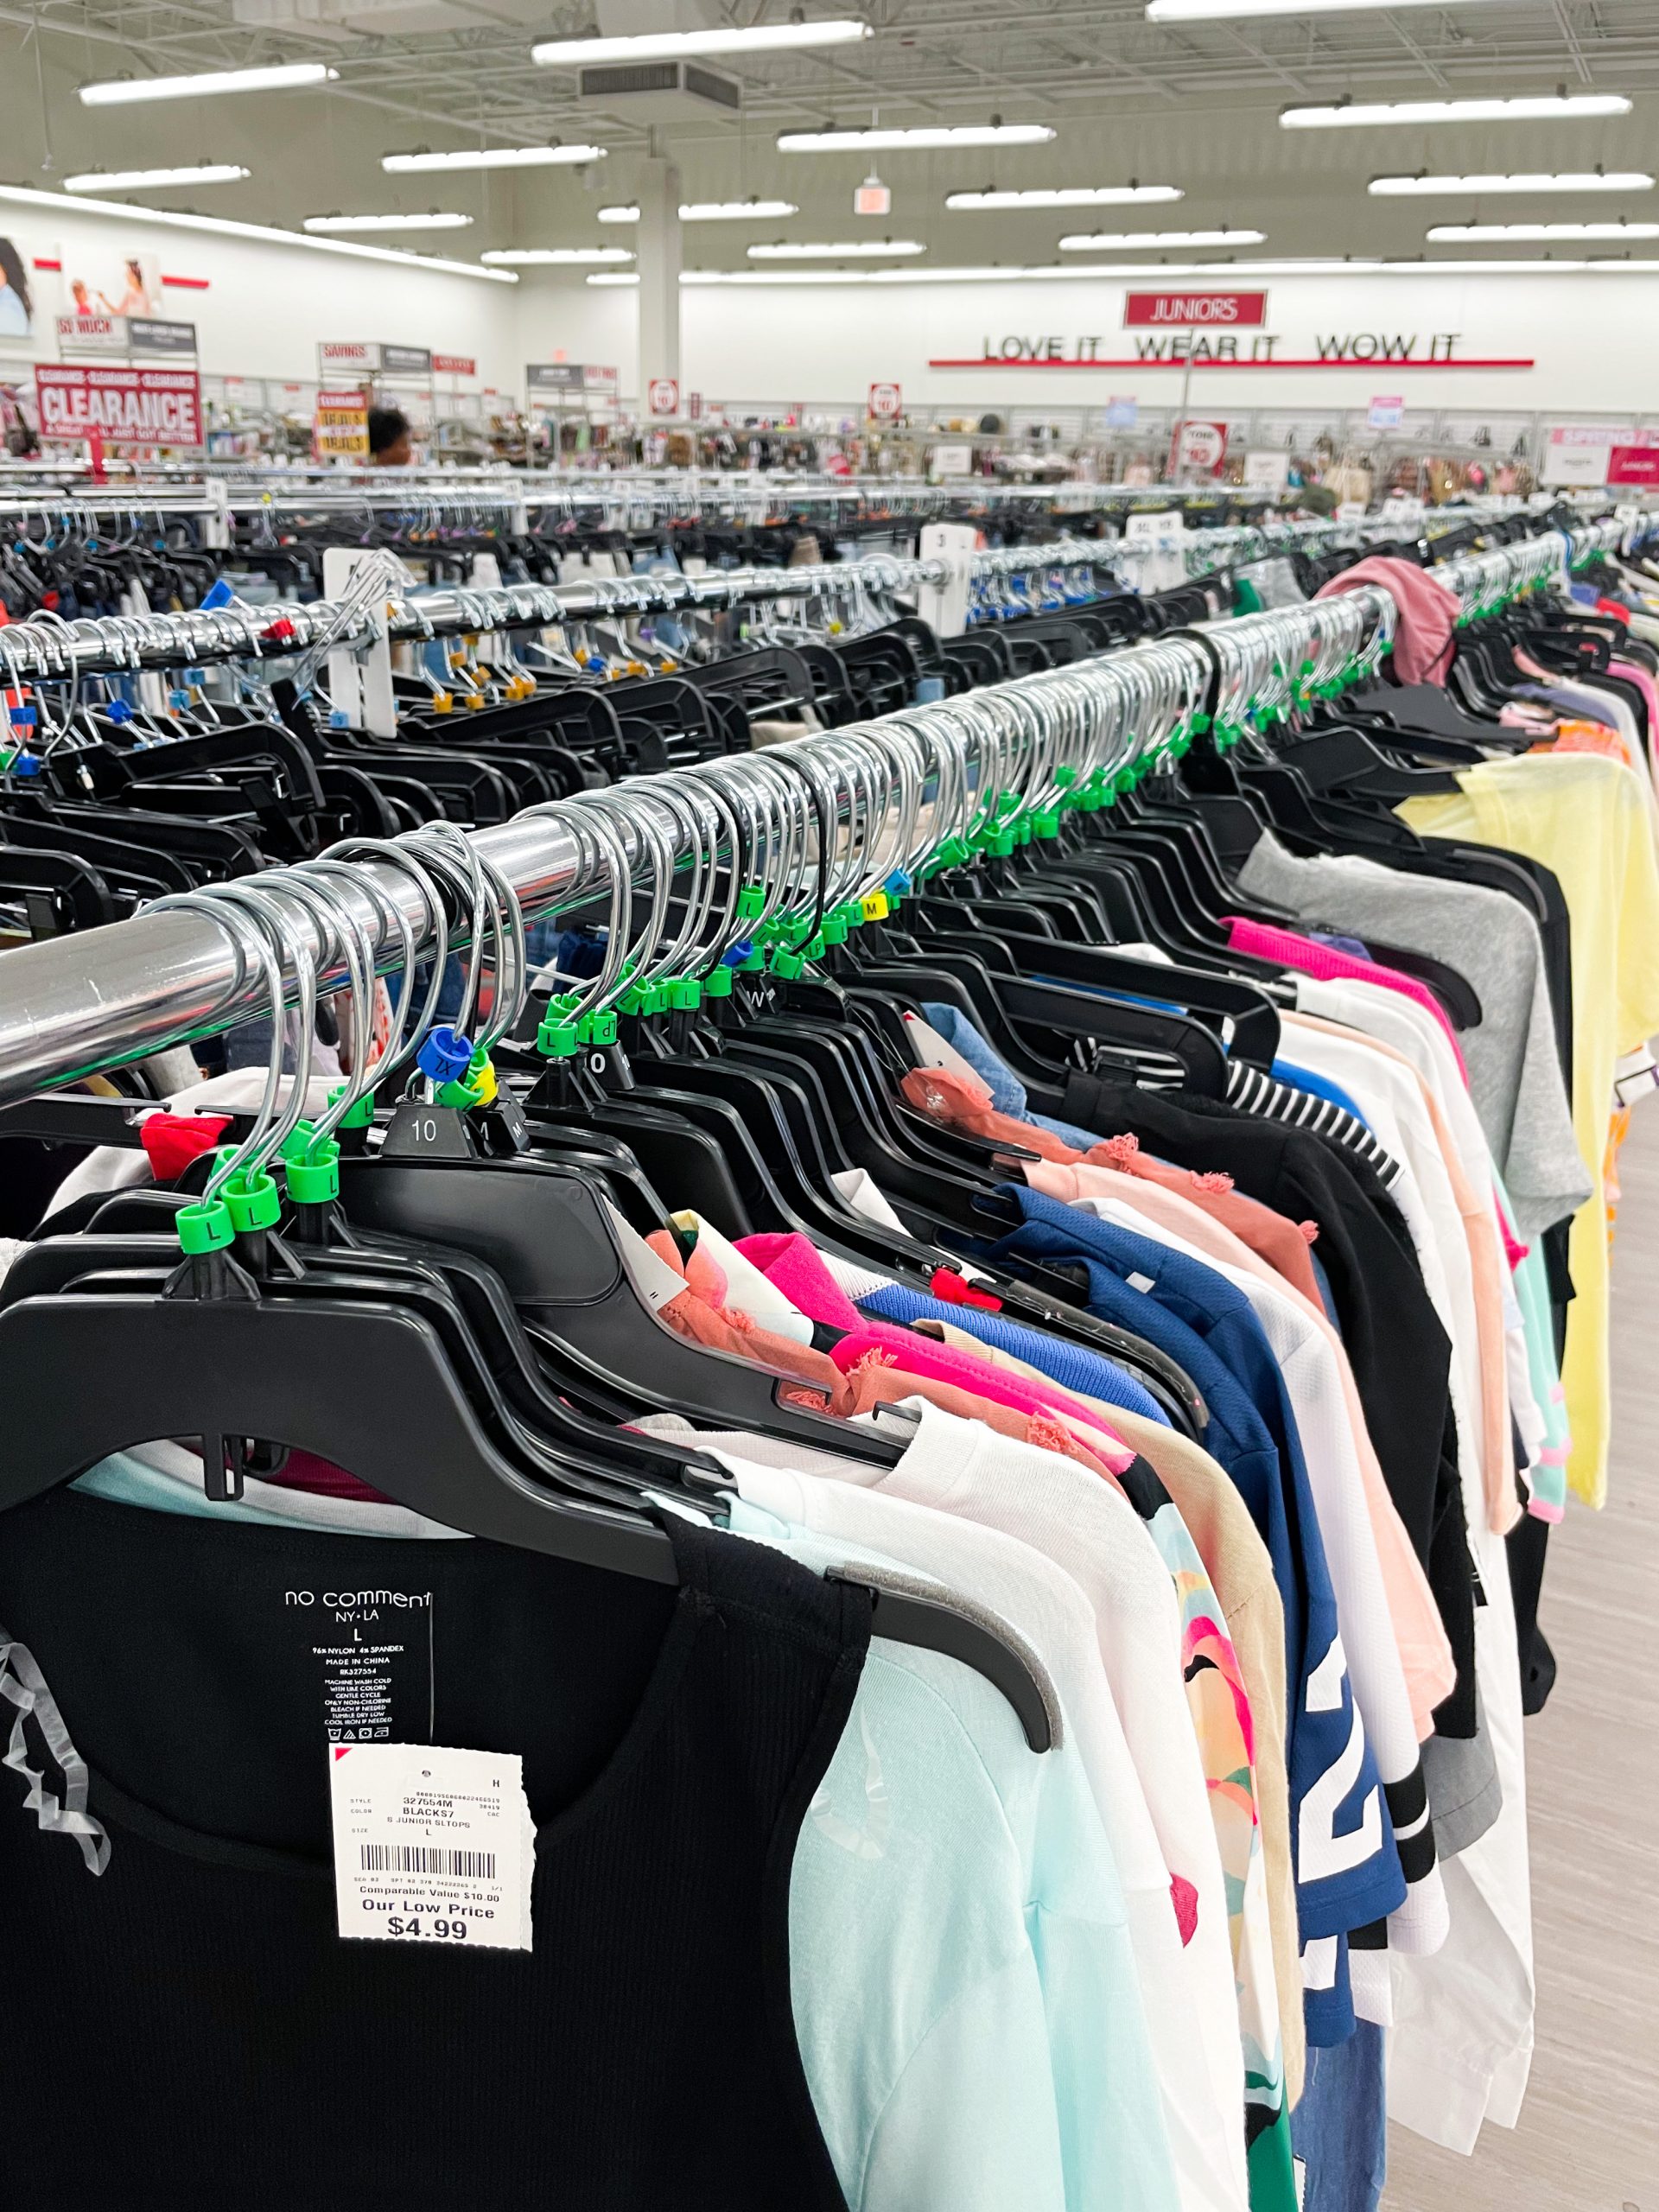 How To Source Inventory For Resale When You Have No Luck At Thrift Stores